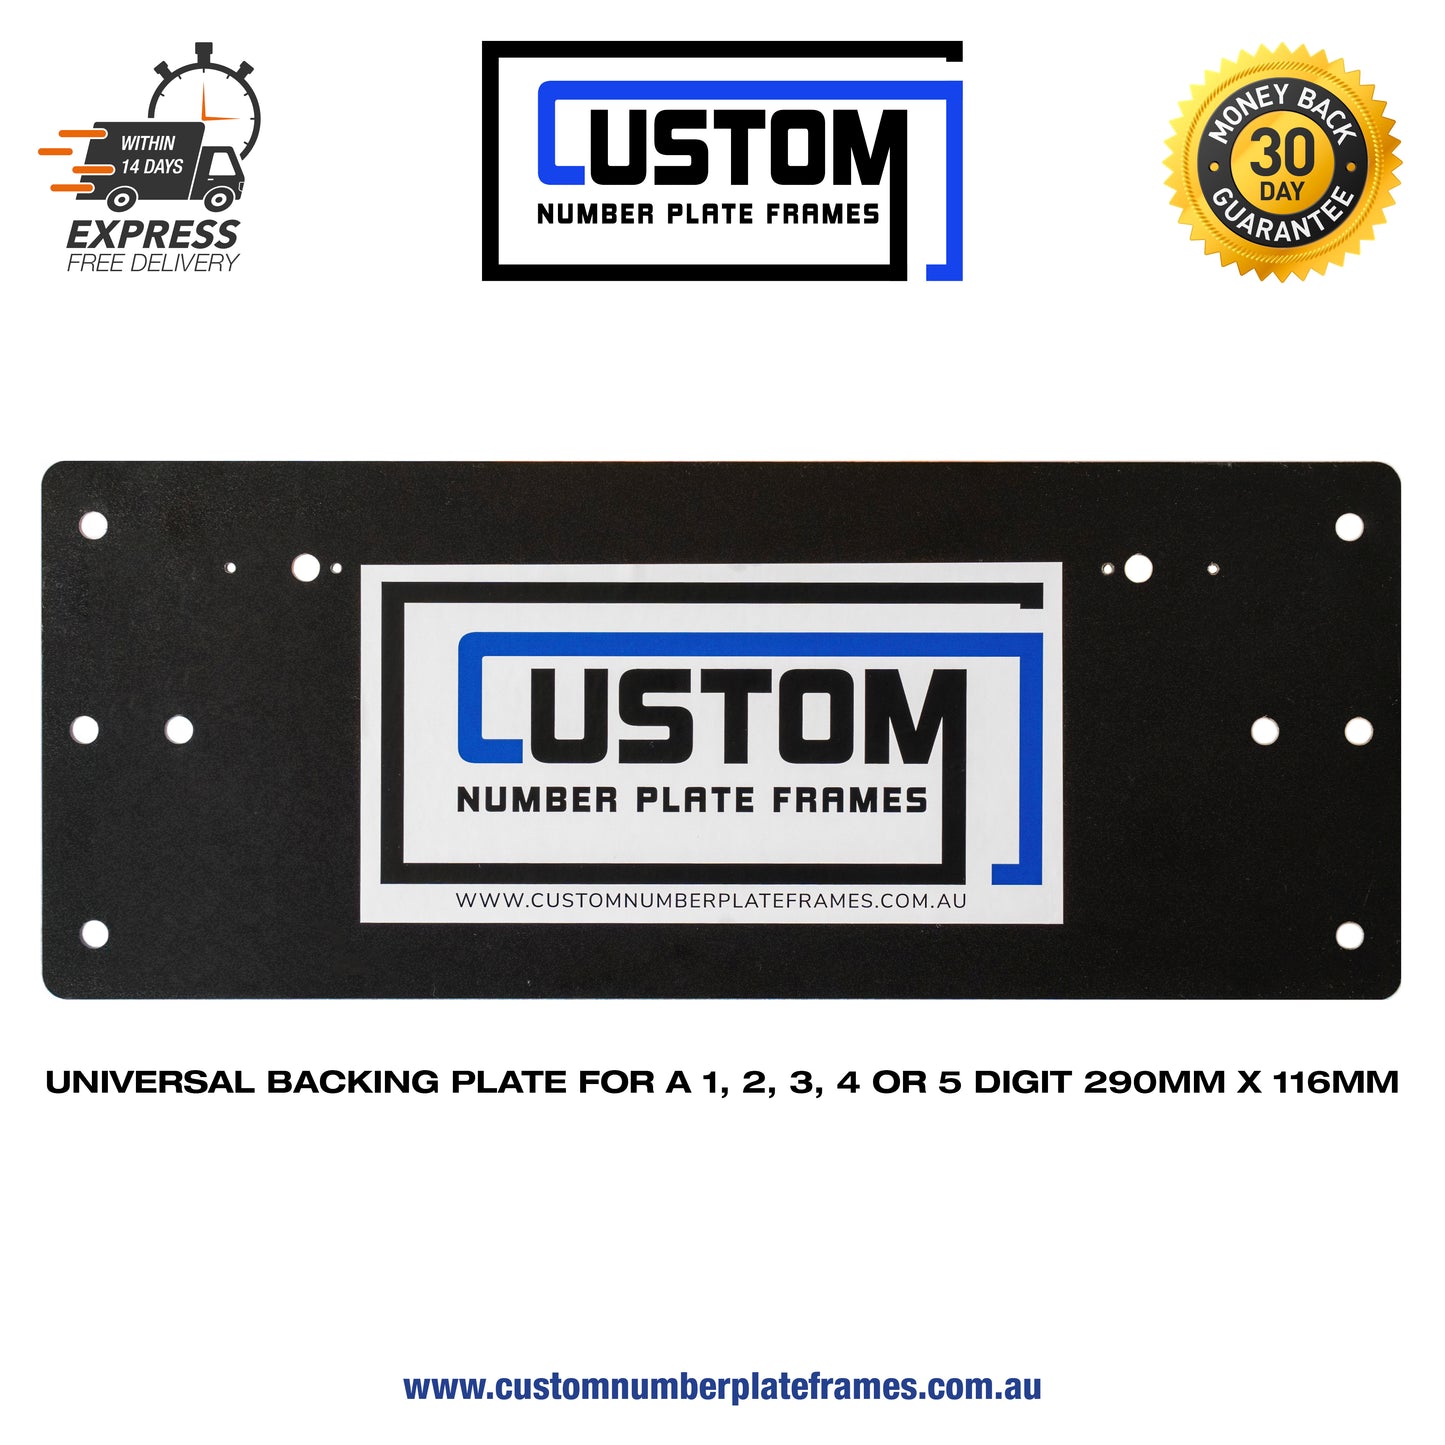 Backing Plate for 3, 4 or 5 Digit Plate 116mm x 290mm Suitable for: All States - CUSTOM NUMBER PLATE FRAMES